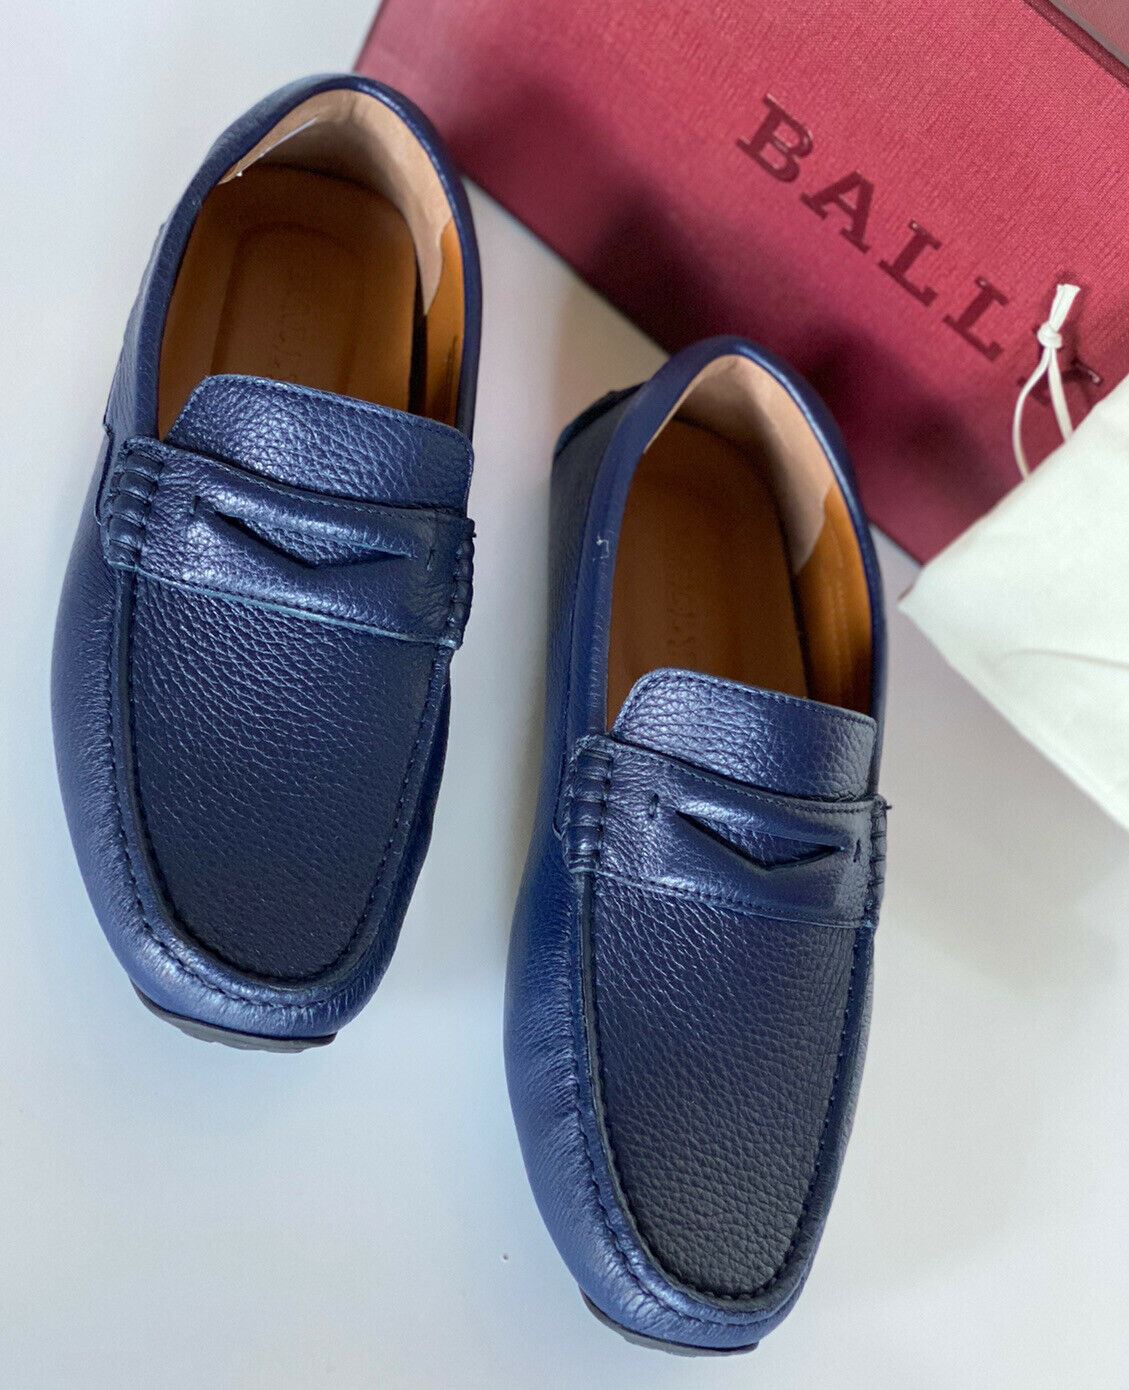 NIB Bally Mens Bovine Grained Leather Driver Loafers Shoes Blue 8 US IT 6233858